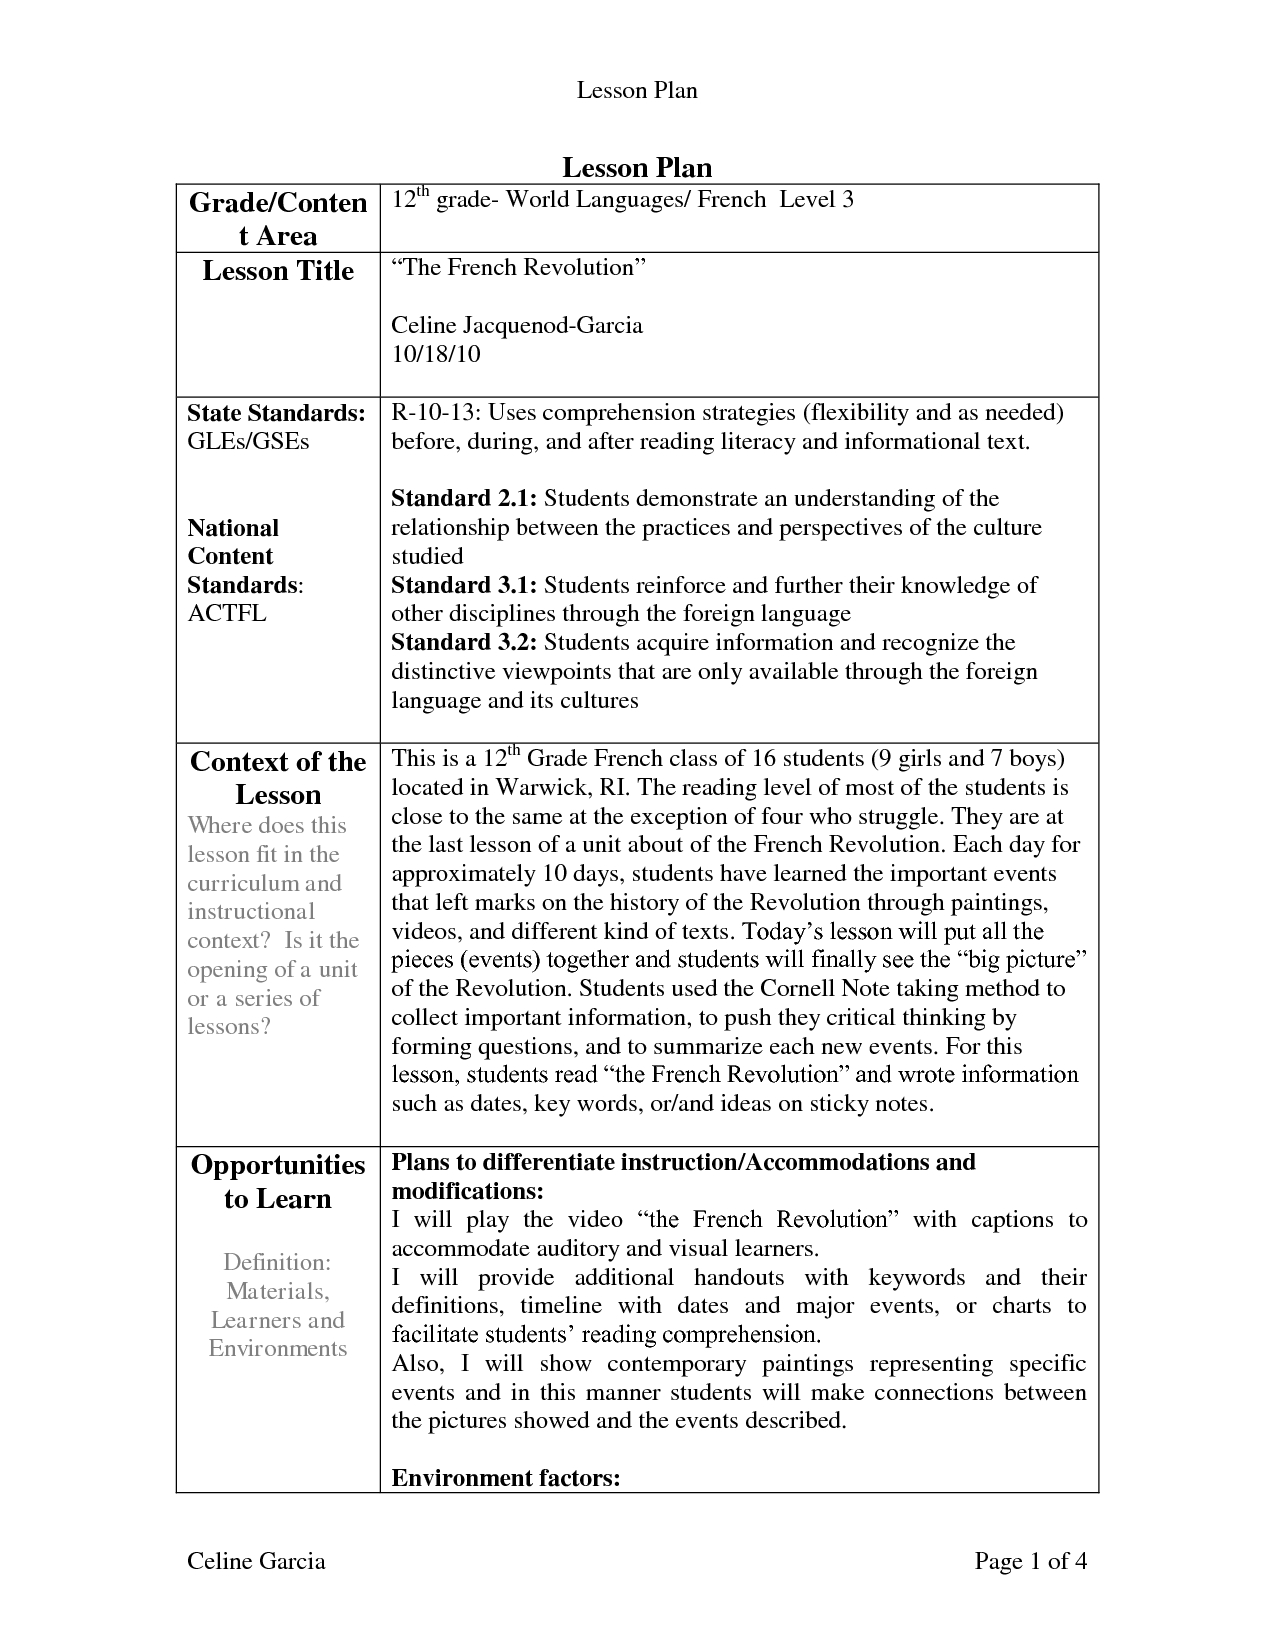 Lesson Plan Template For French - Google Search | Lesson